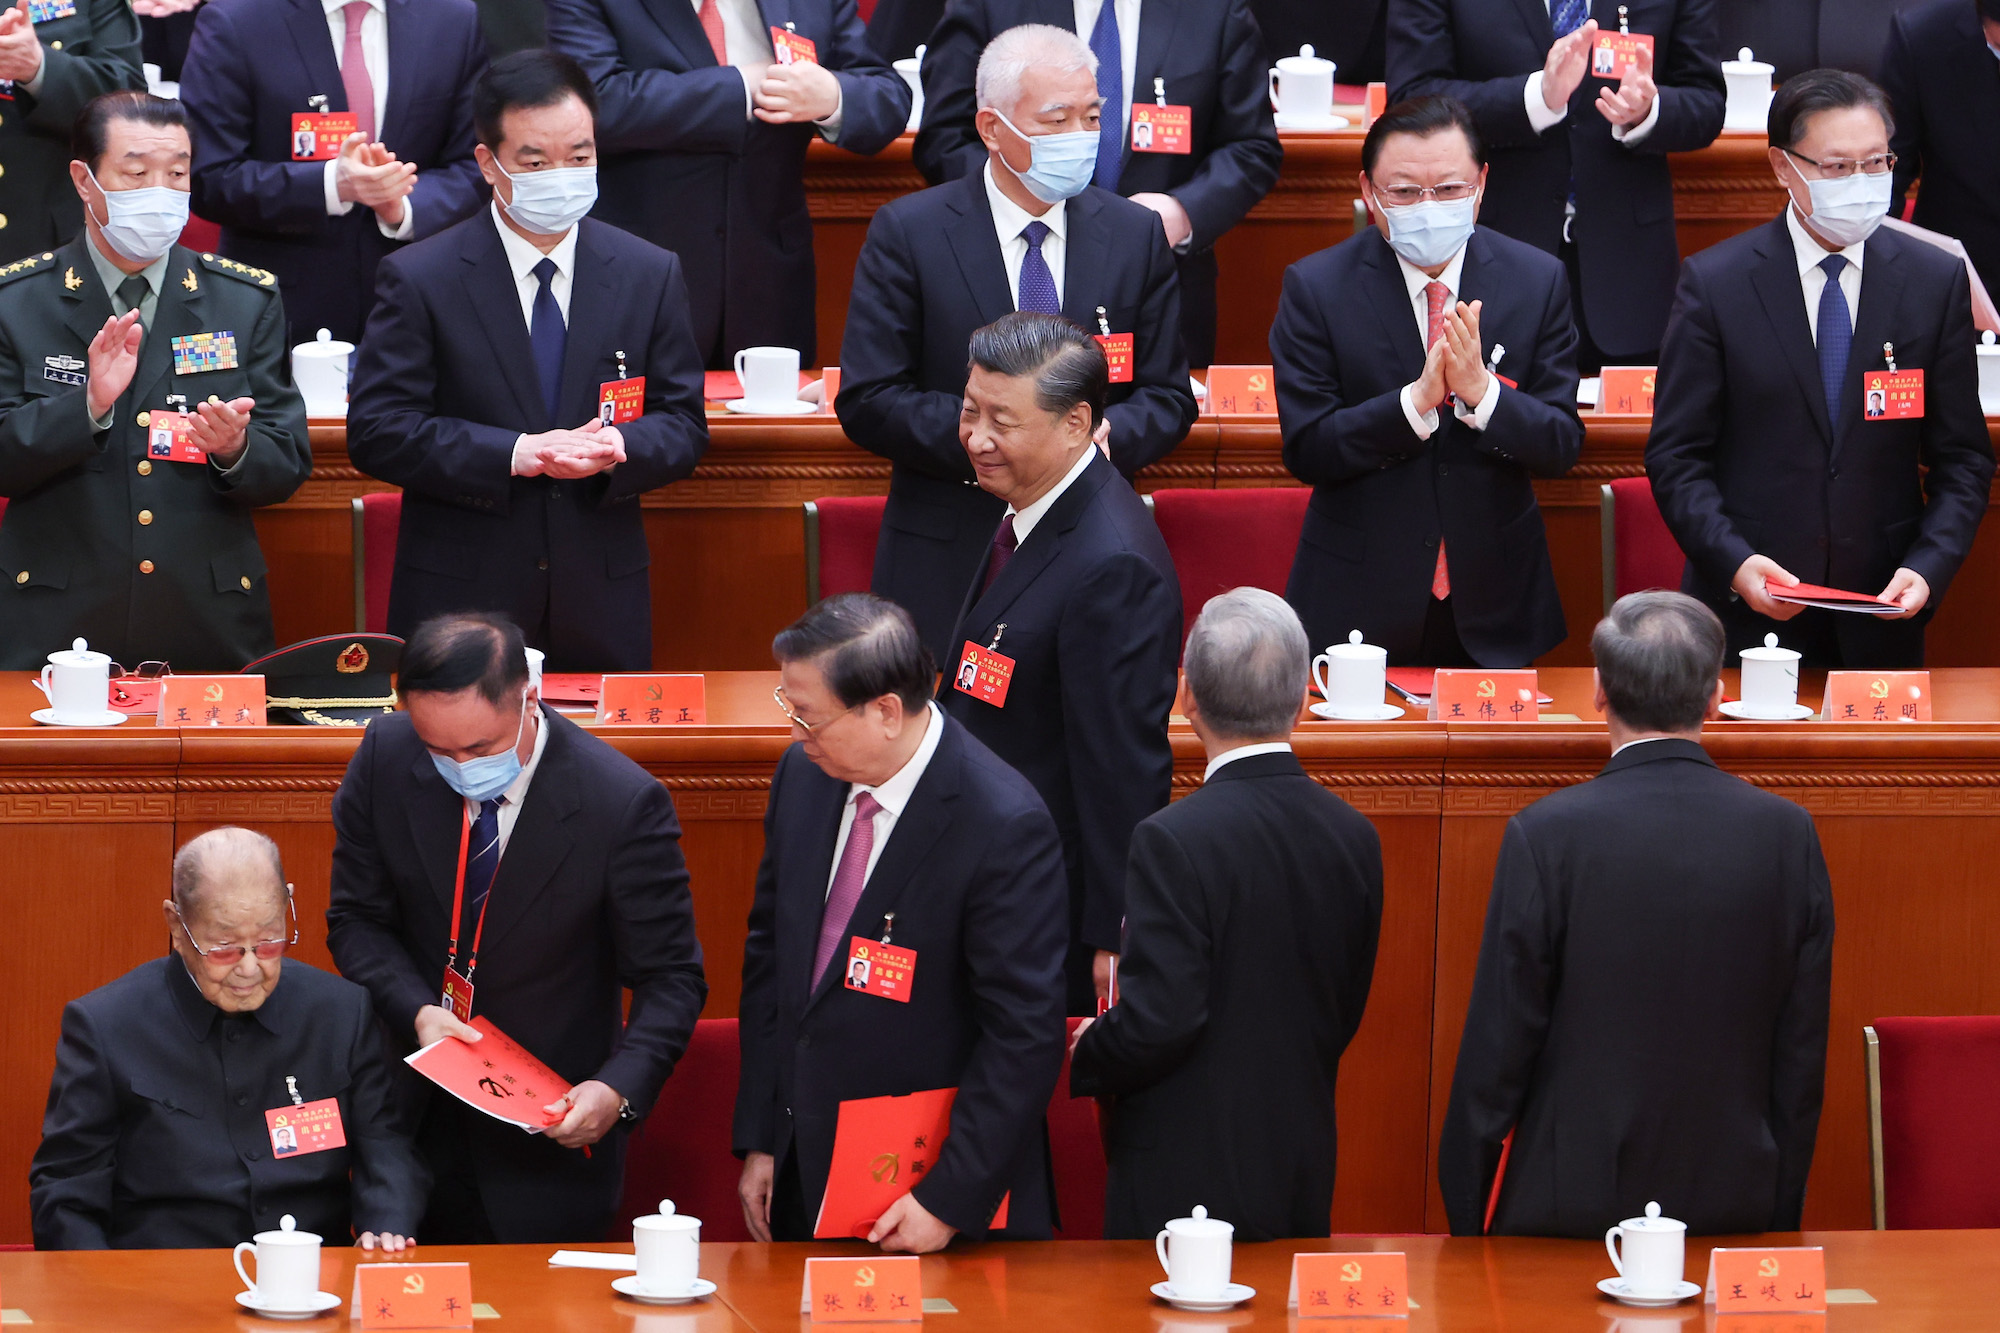 Xi Jinping takes his departure at the conclusion of the closing ceremony on October 22.